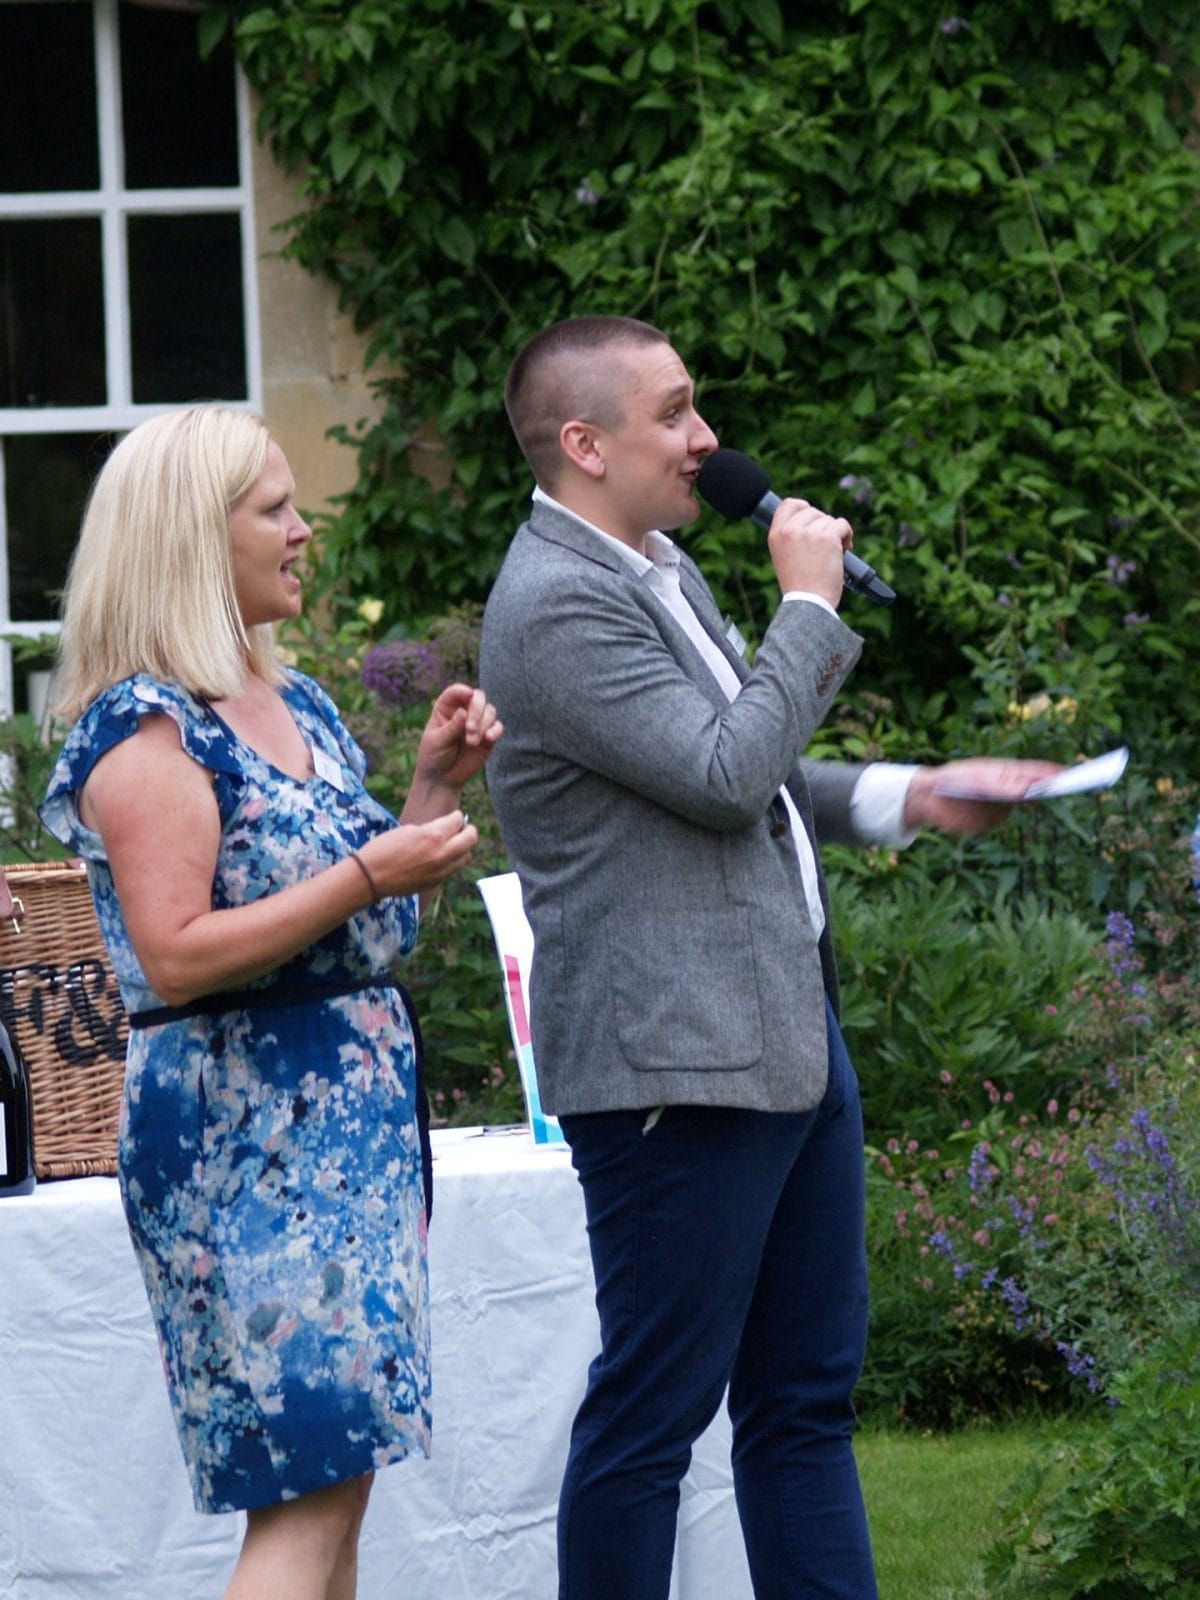 Man and woman laughing, giving out raffle prizes. Man is holding a microphone